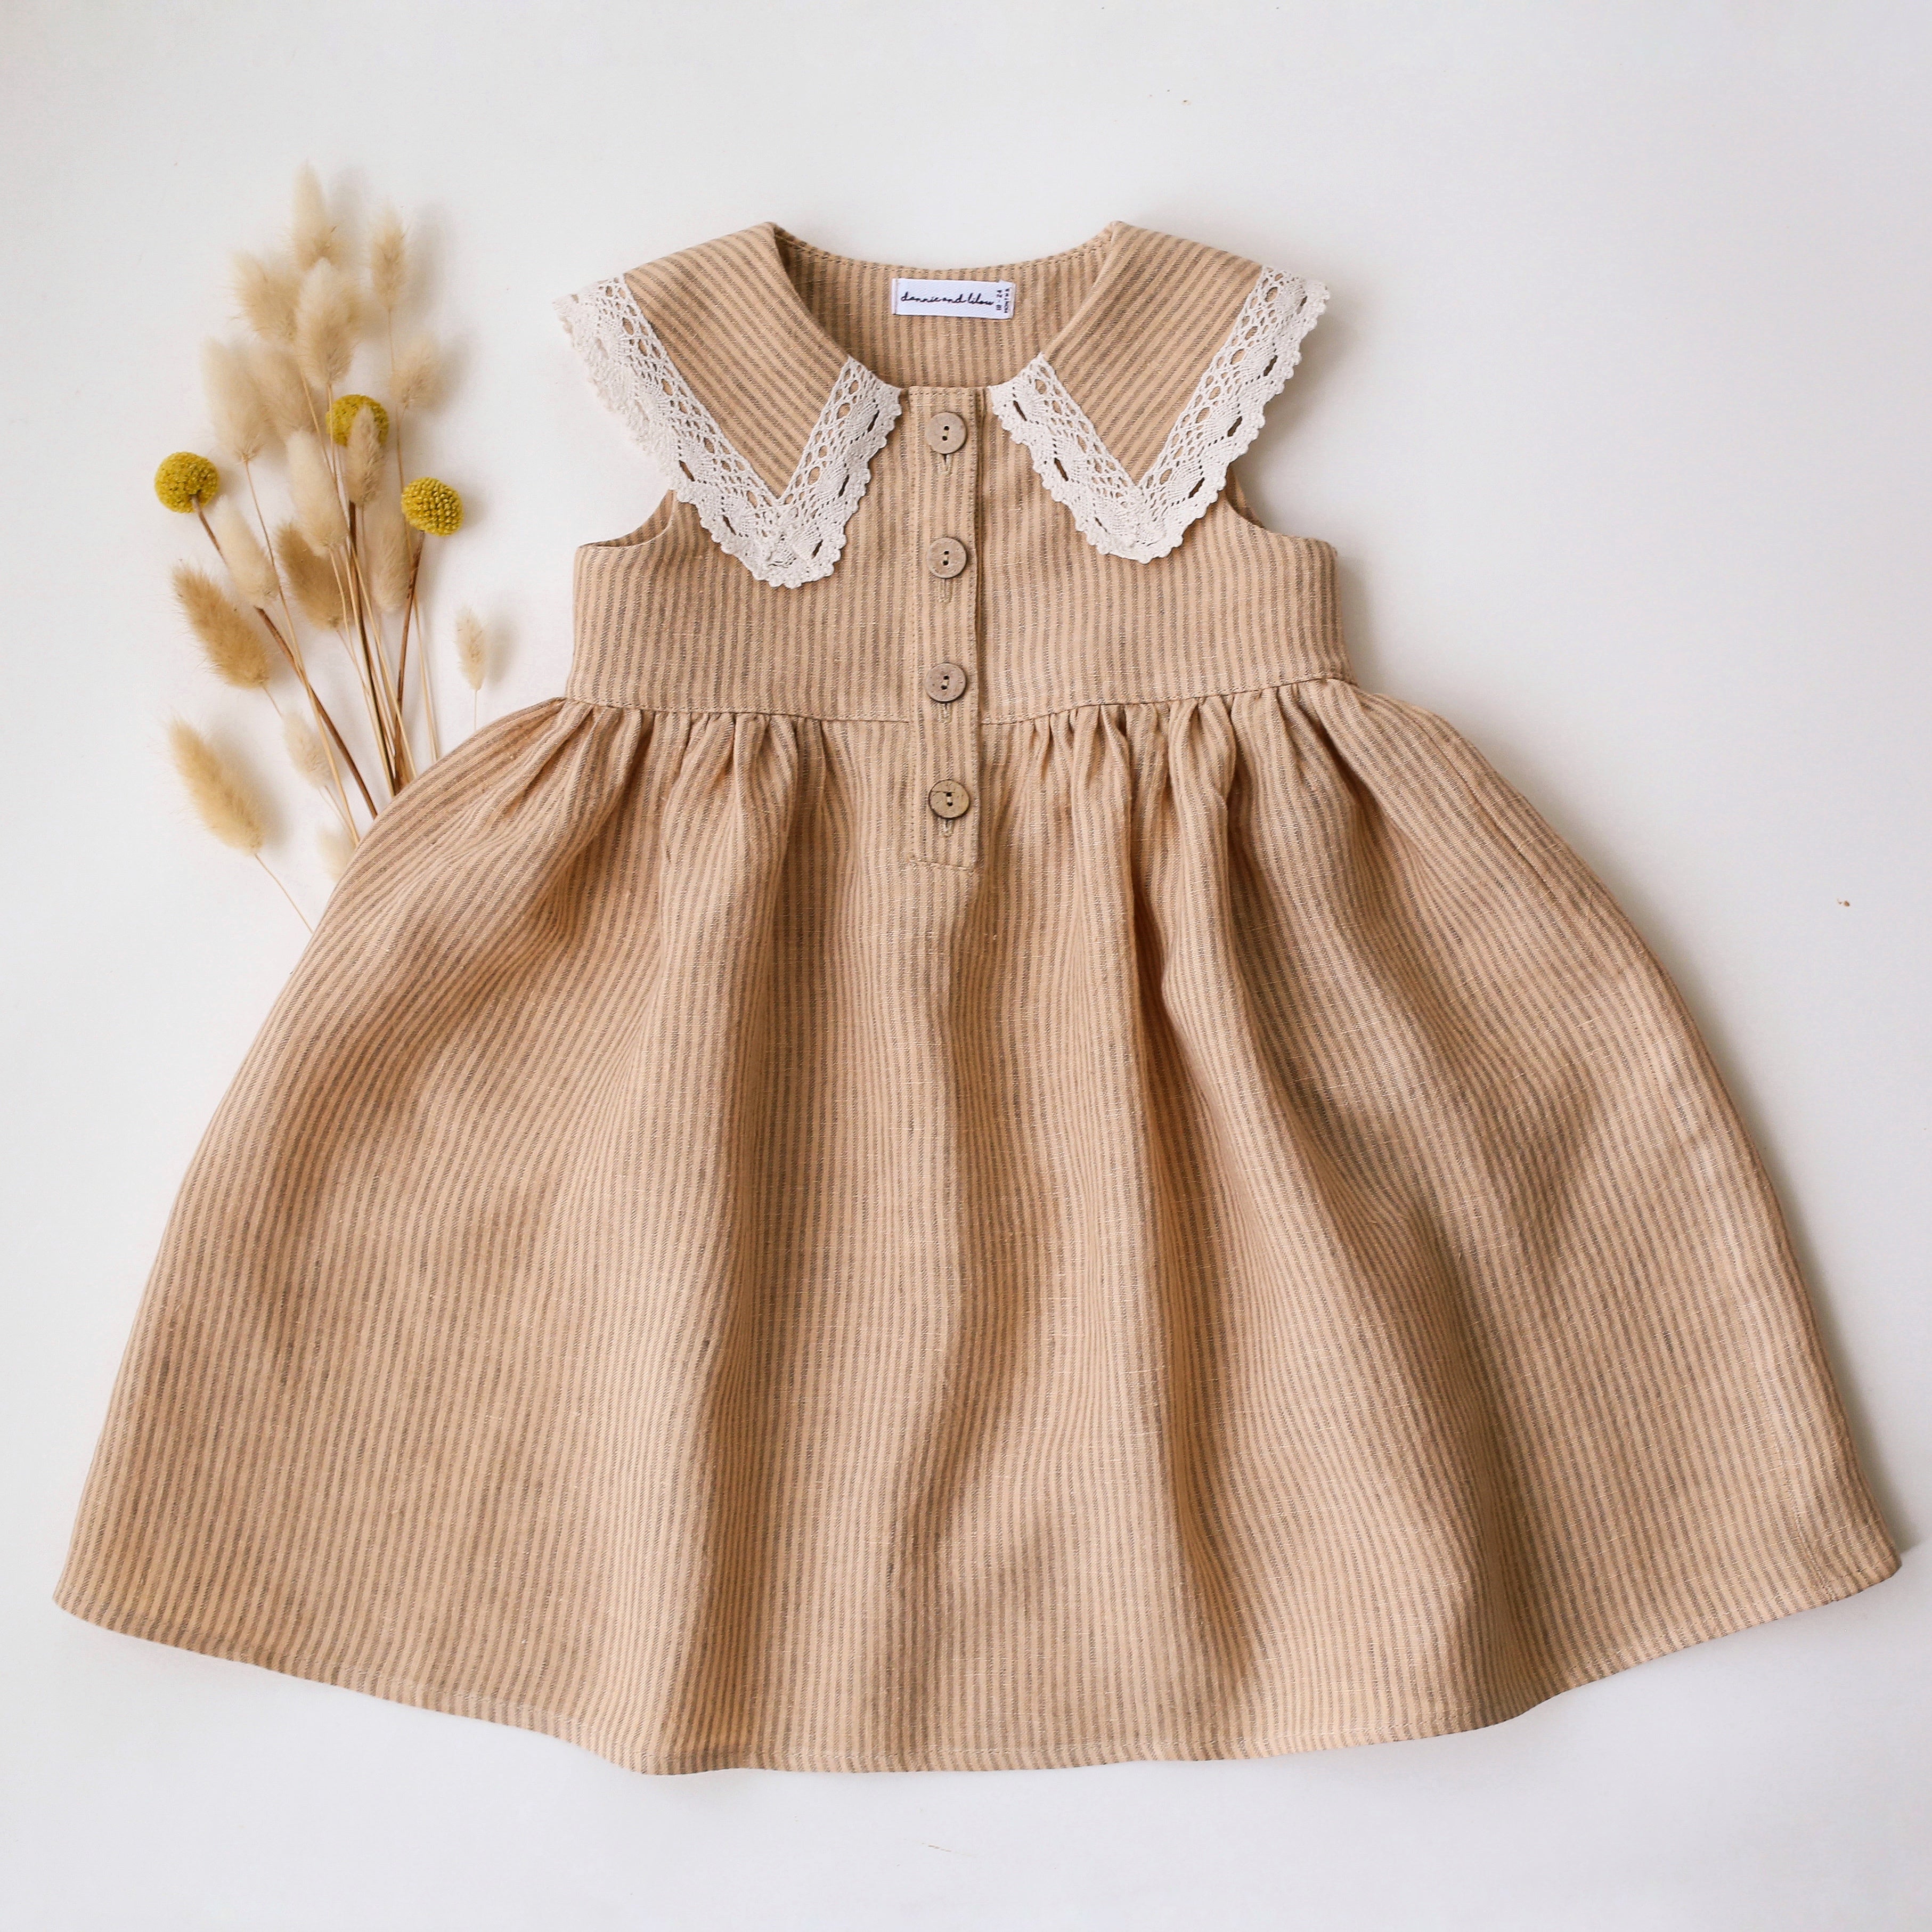 Desert Tan Stripe Linen Pointed Collar Dress with Lace